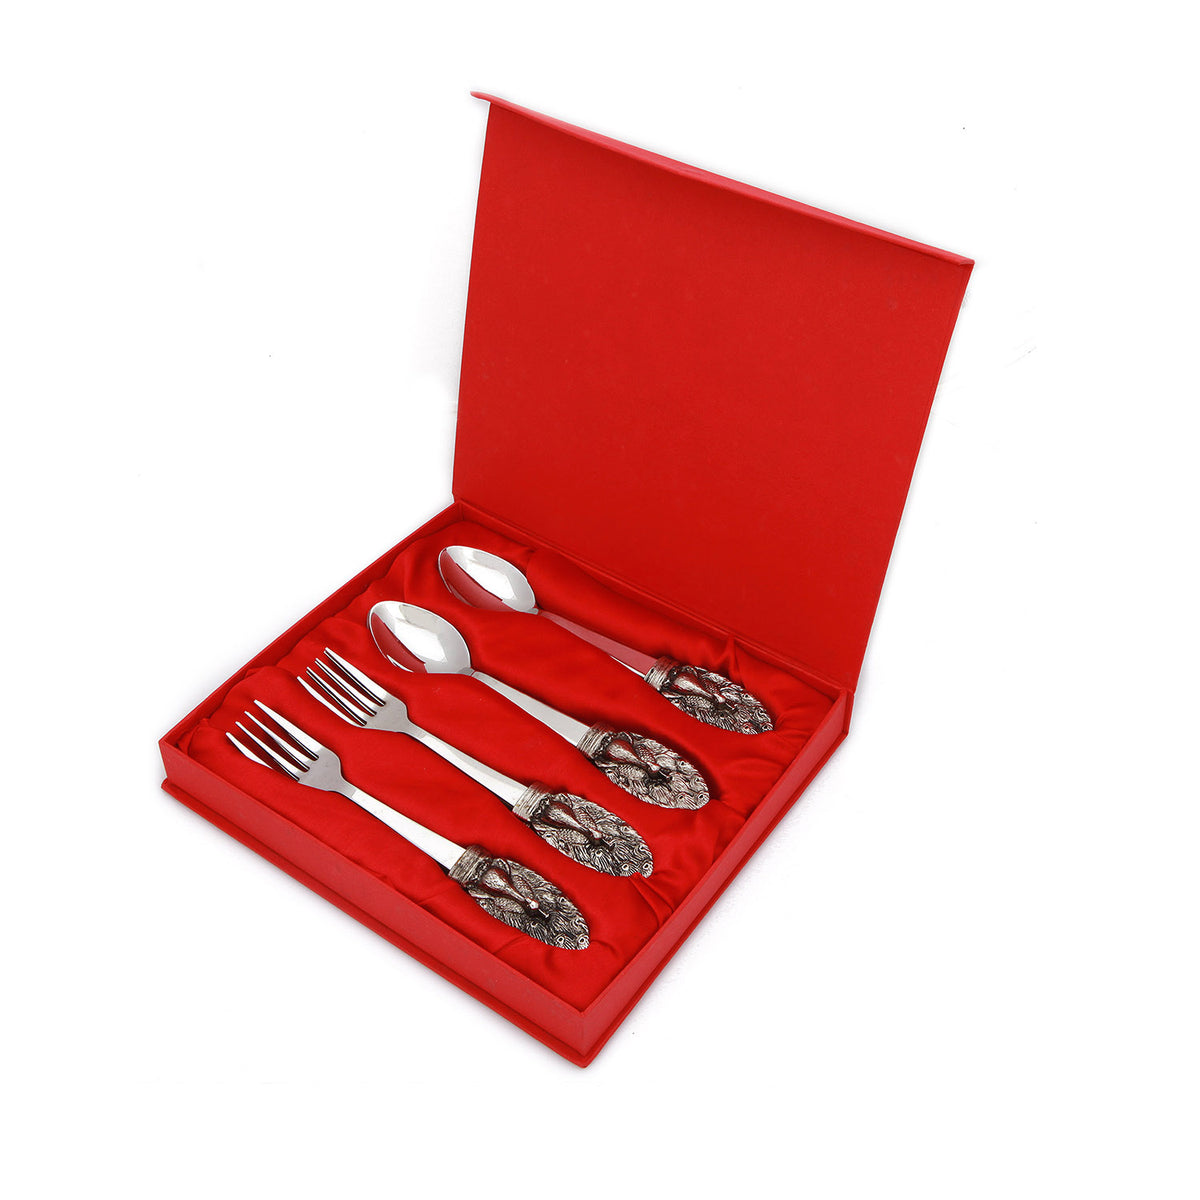 Ethenic Hand Crafted Spoon, Fork Set | Flatware